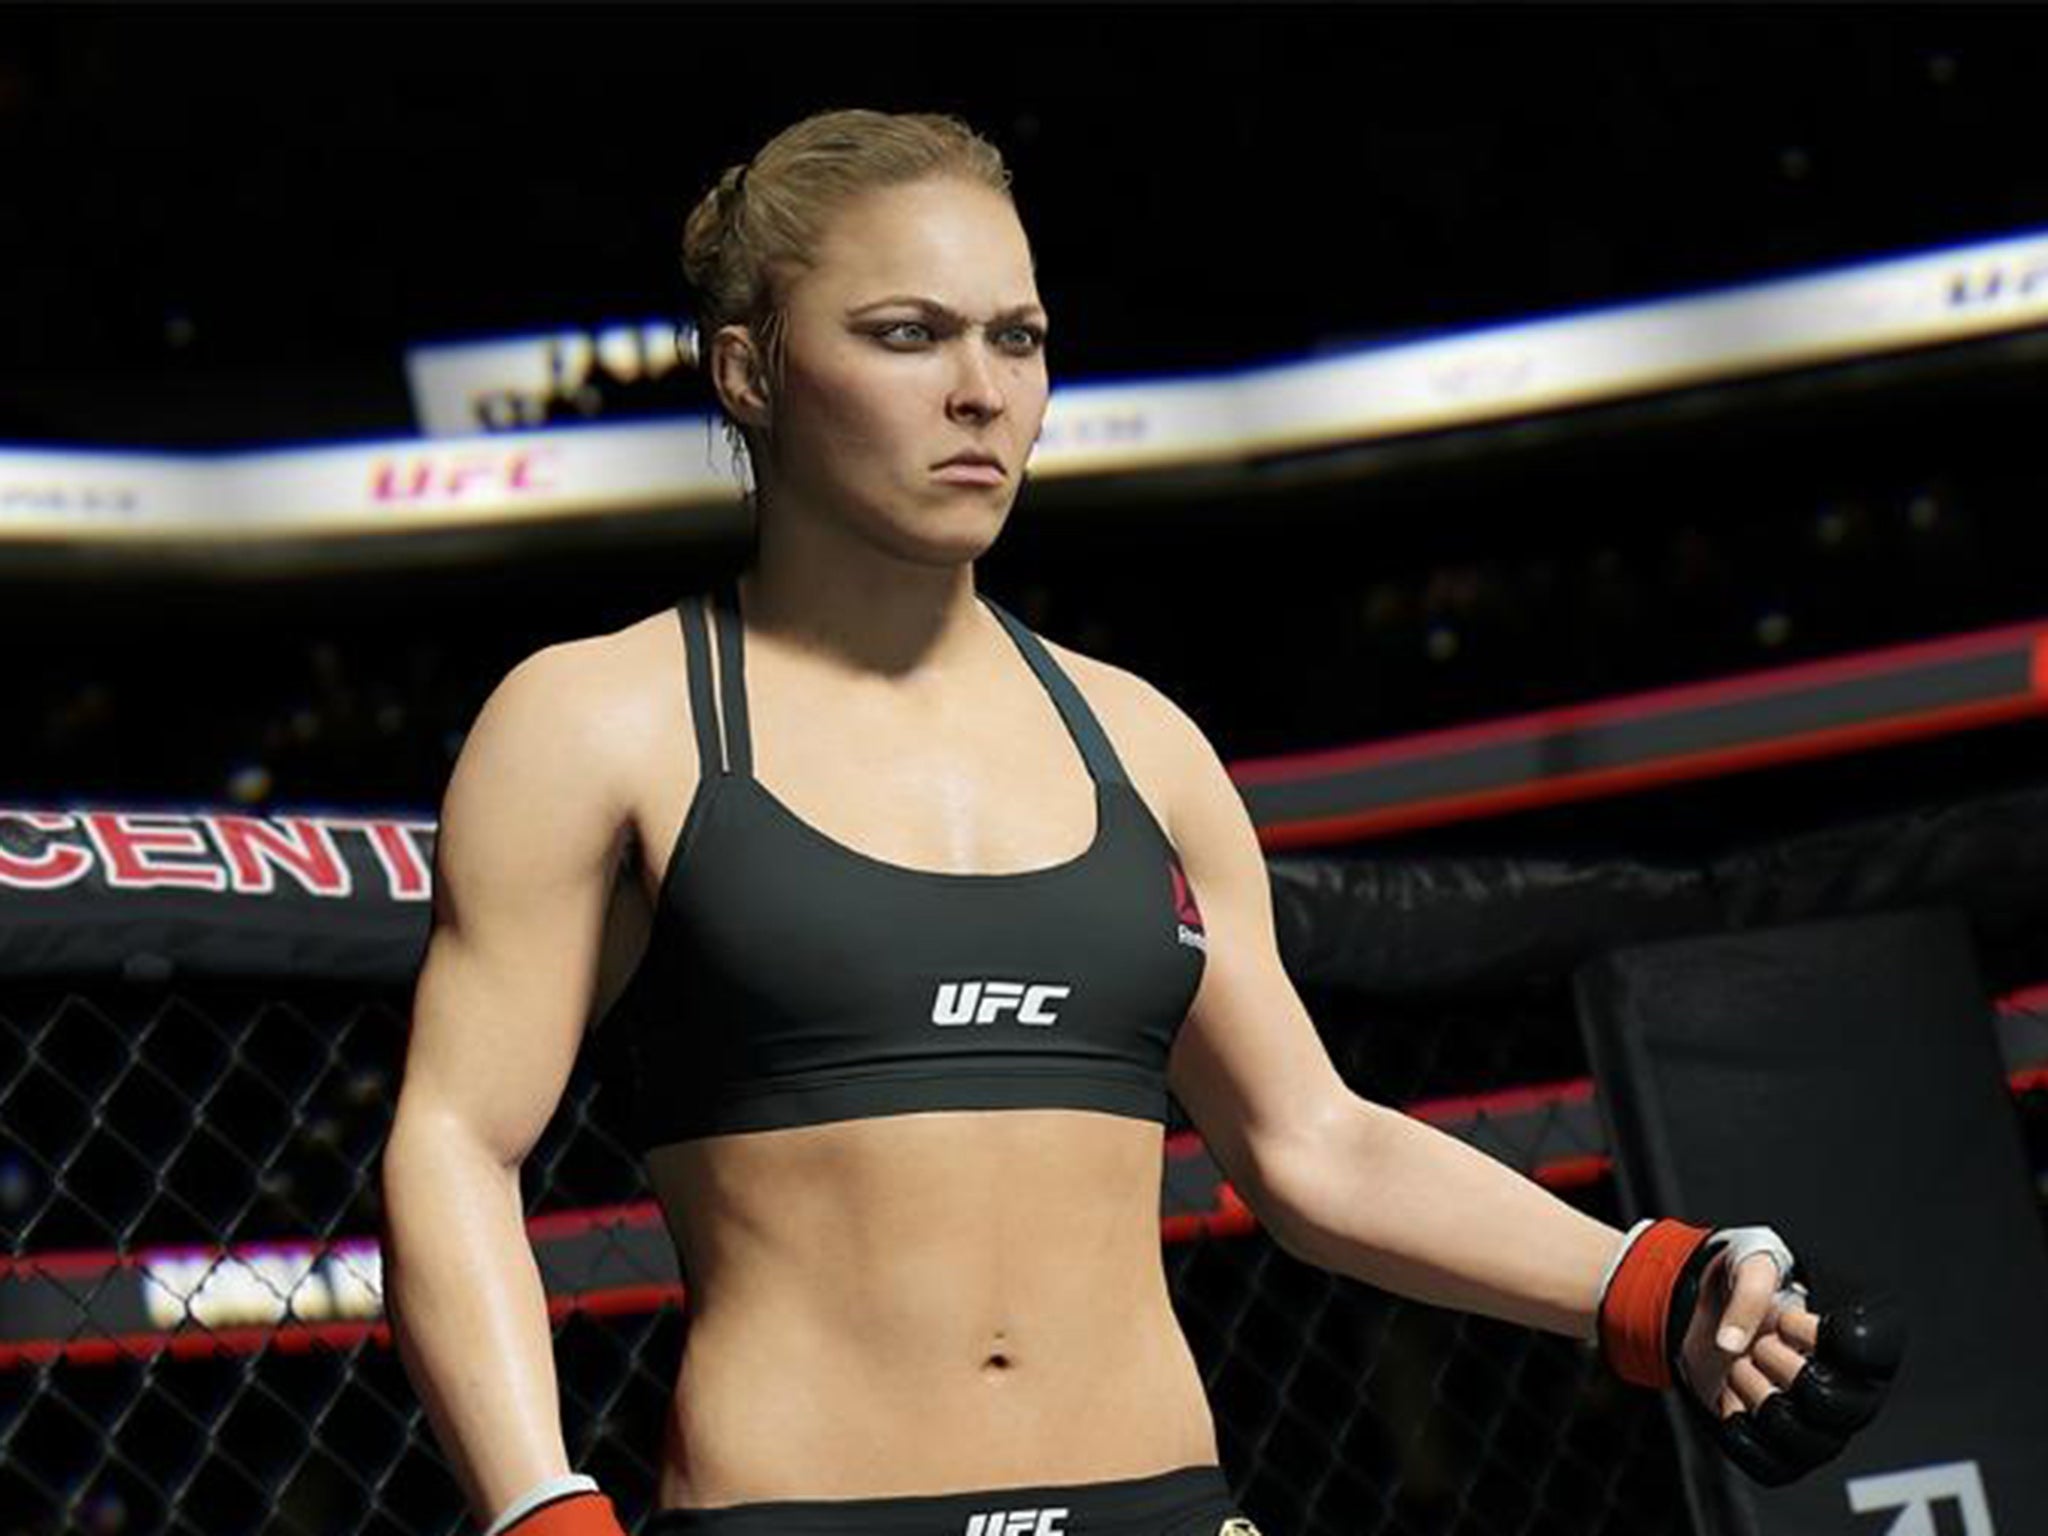 PlayStation Home (Archive): Female UFC sports bra (from www